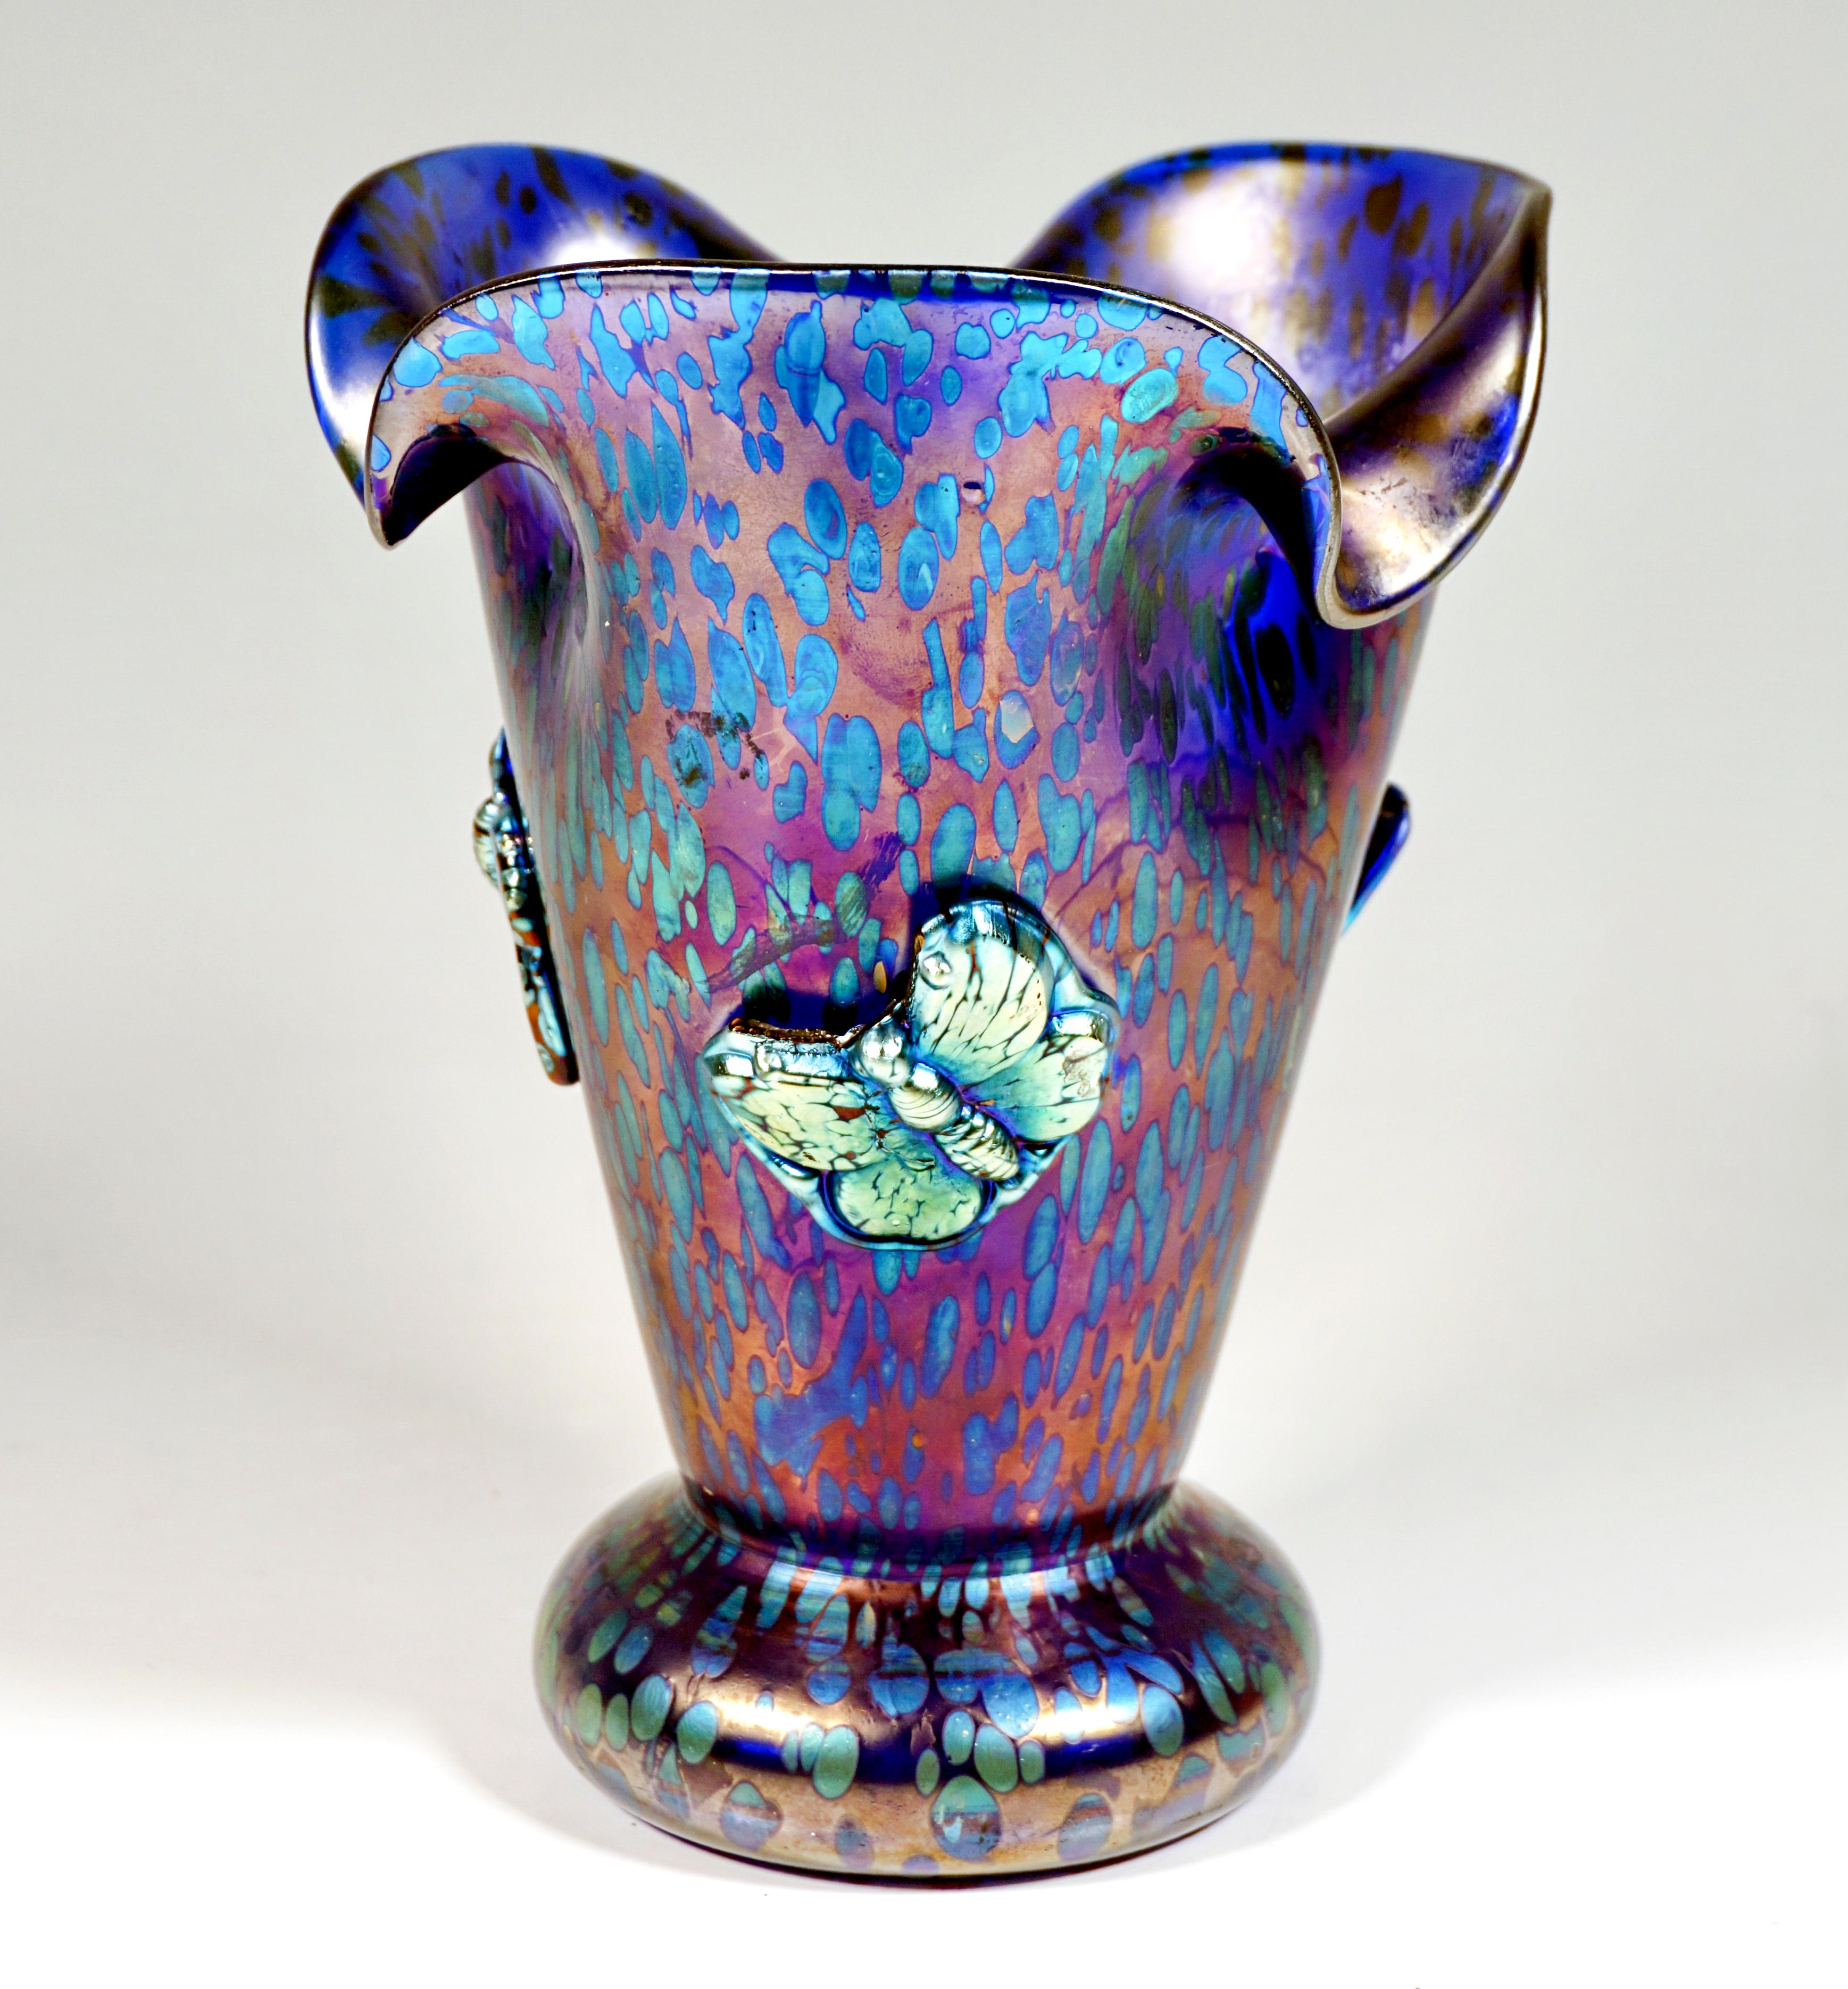 Finest Bohemian Art Nouveau glass vase:
Mould-blown vase with torus-shaped stand and funnel-shaped attached wall with trefoil-shaped, lobed mouth rim, wall and inside satin-finished, polished pontil.

Shape: Production number / pattern not